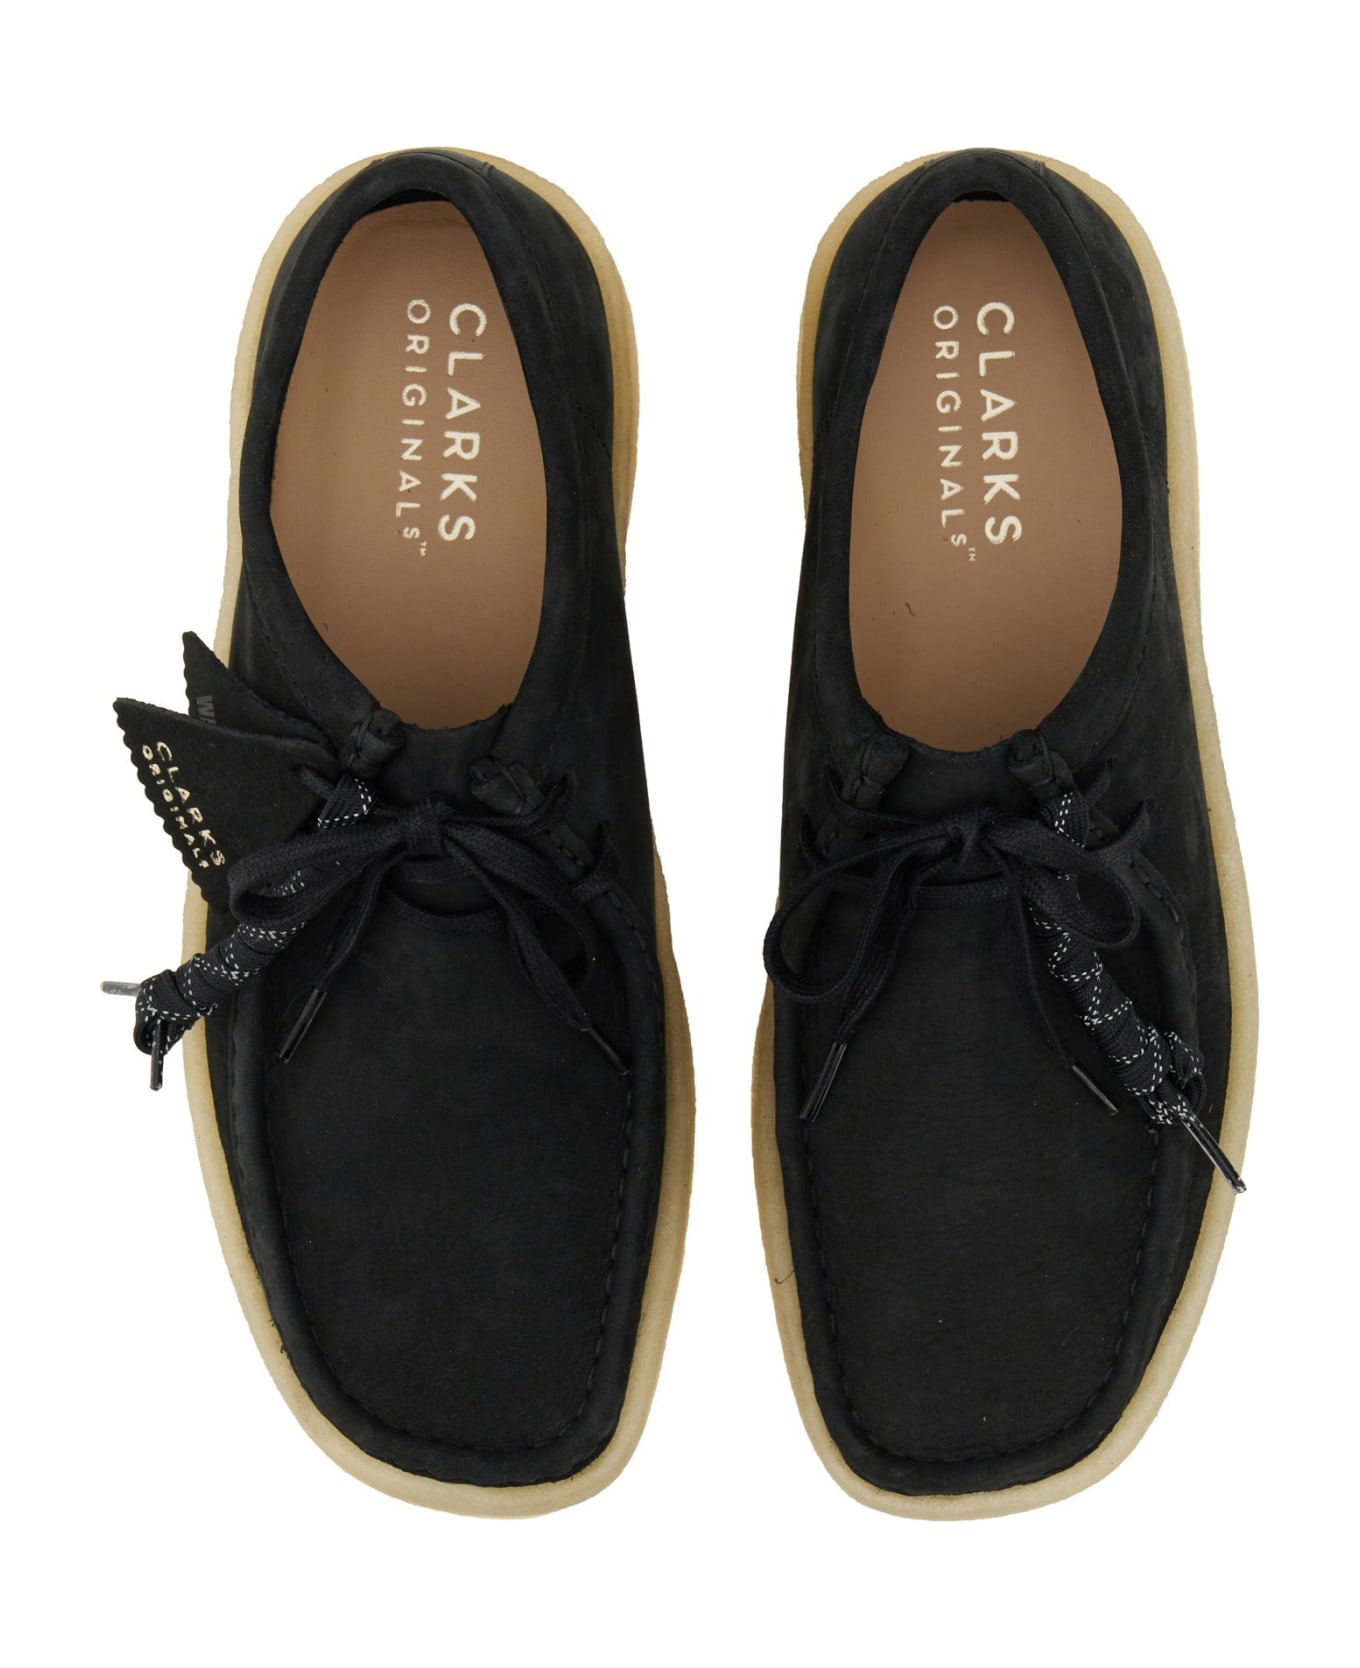 Clarks Moccasin Wallabee Cup - NERO